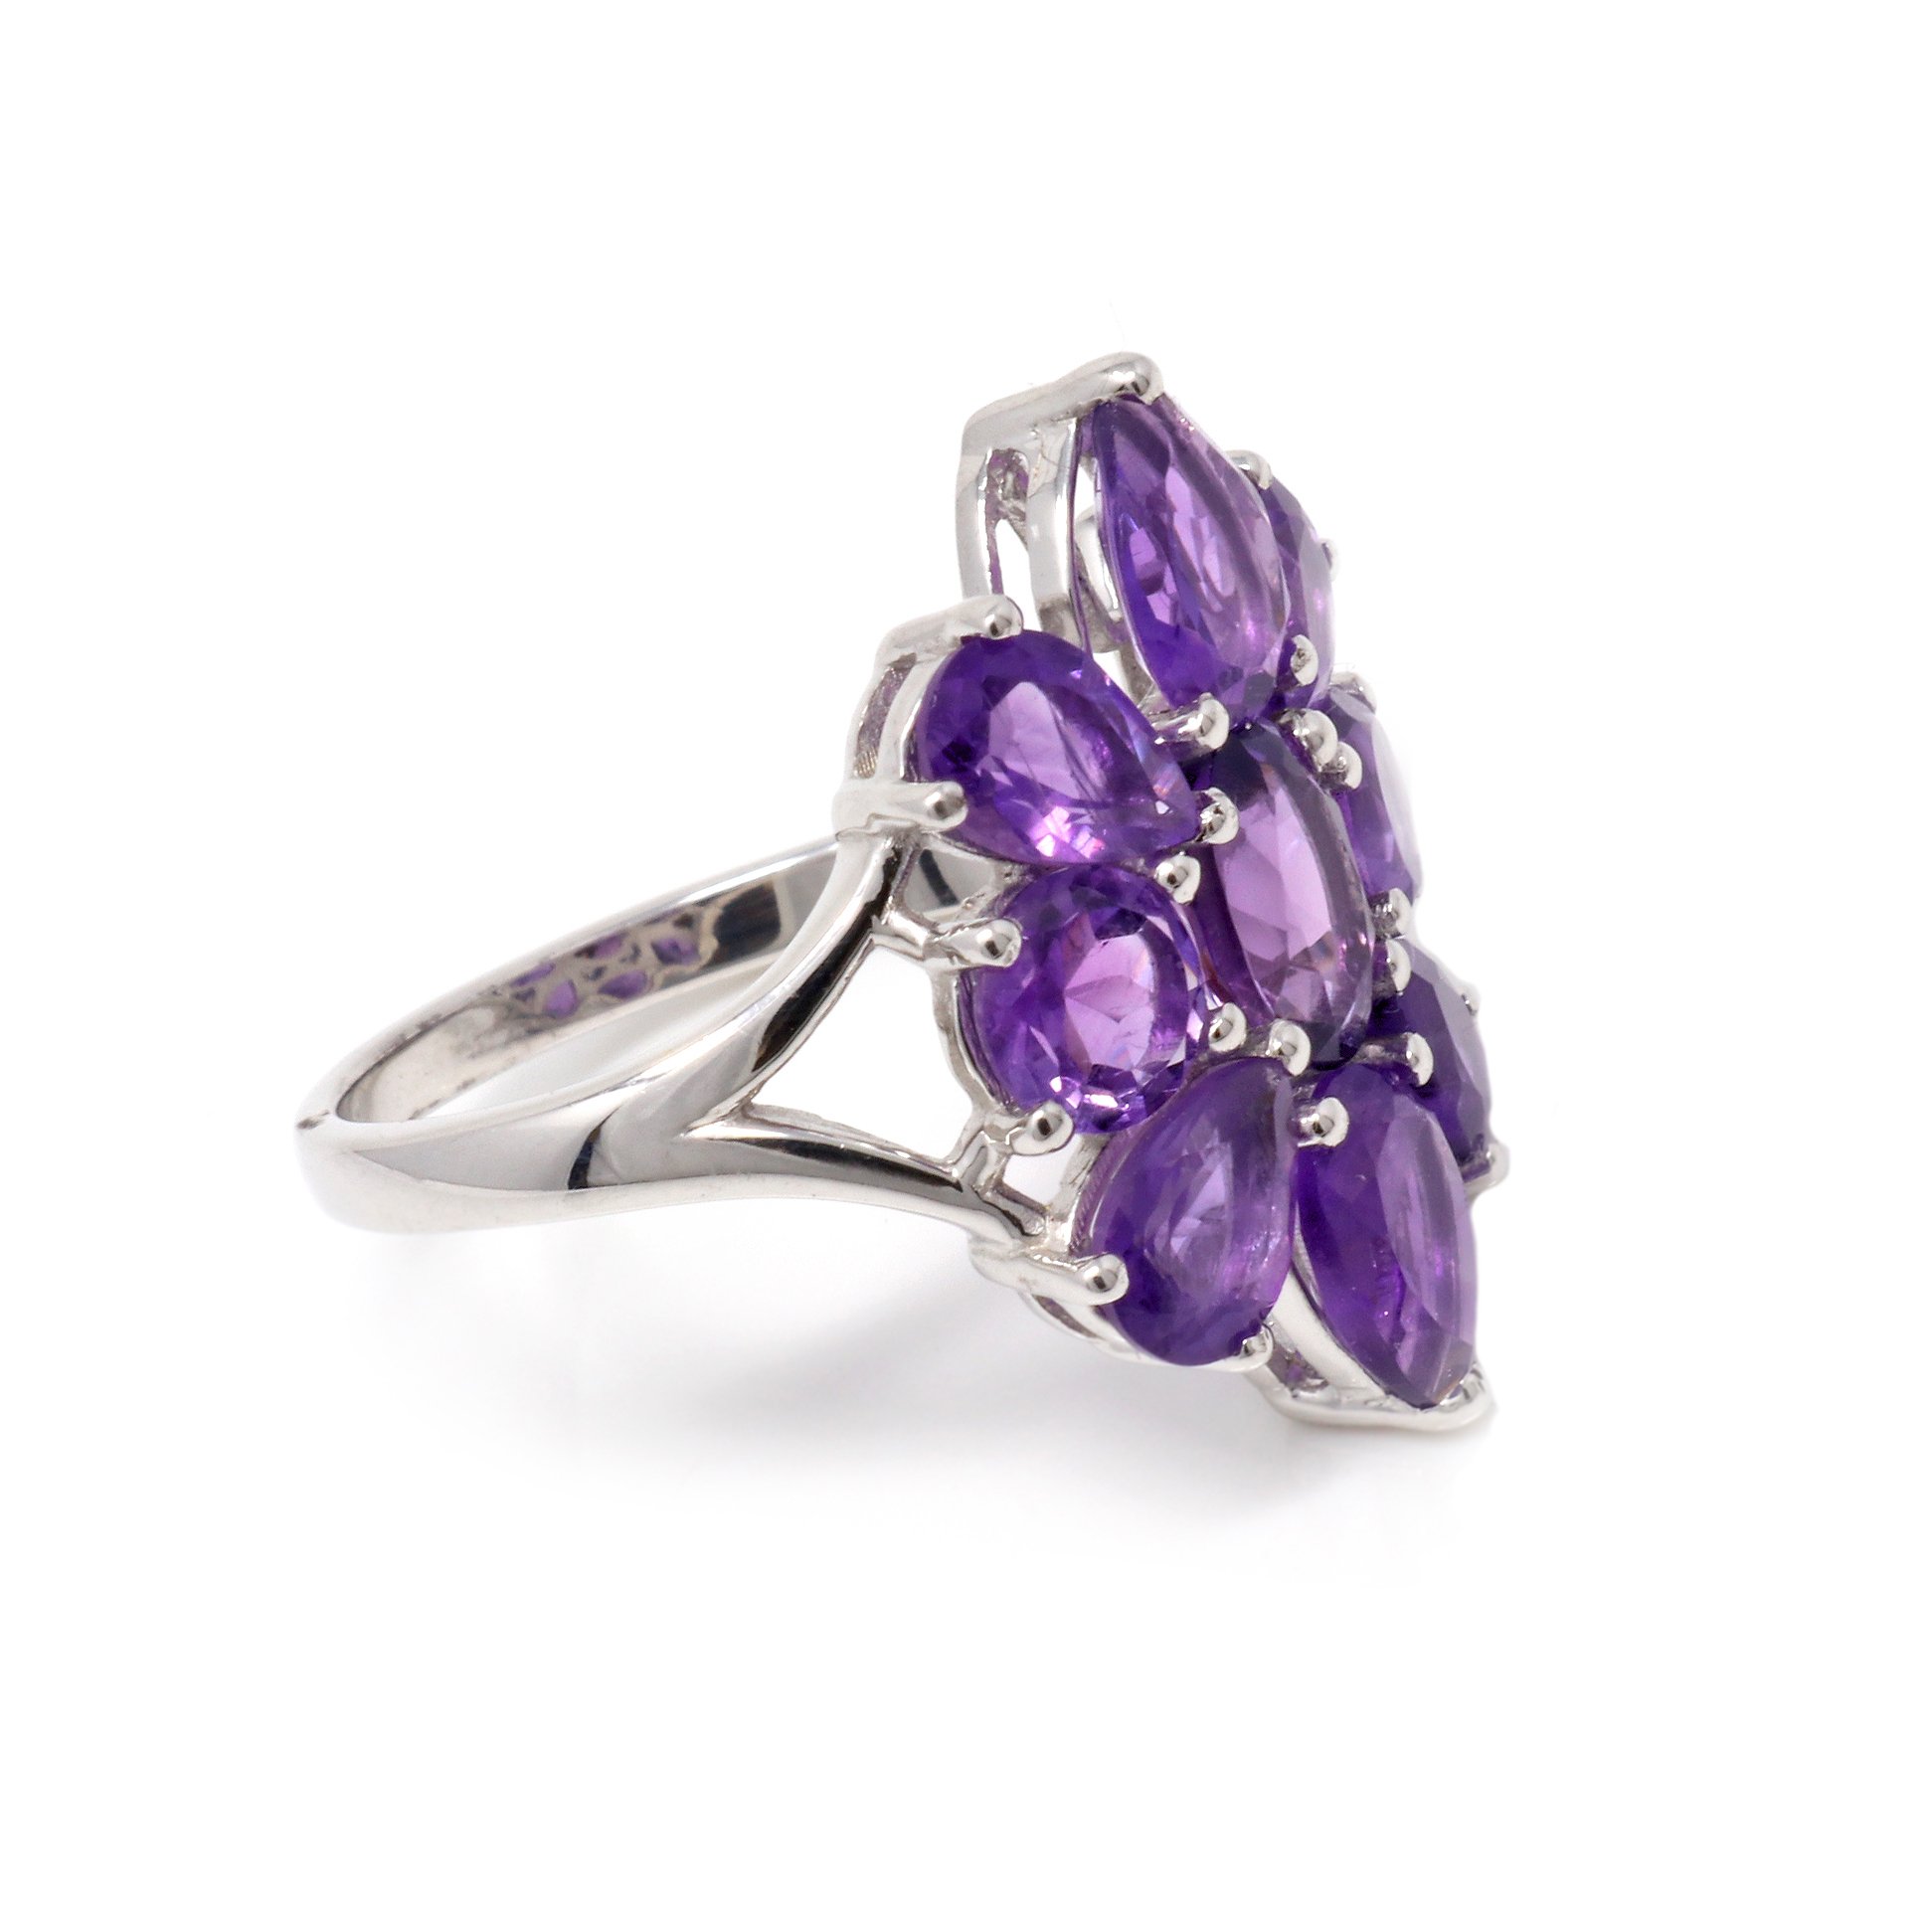 Amethyst Ring Size 5 - with 9 Faceted Stones In Shape Of Dahlia Flower Set On Silver Band With Cutout Top - Prong Set